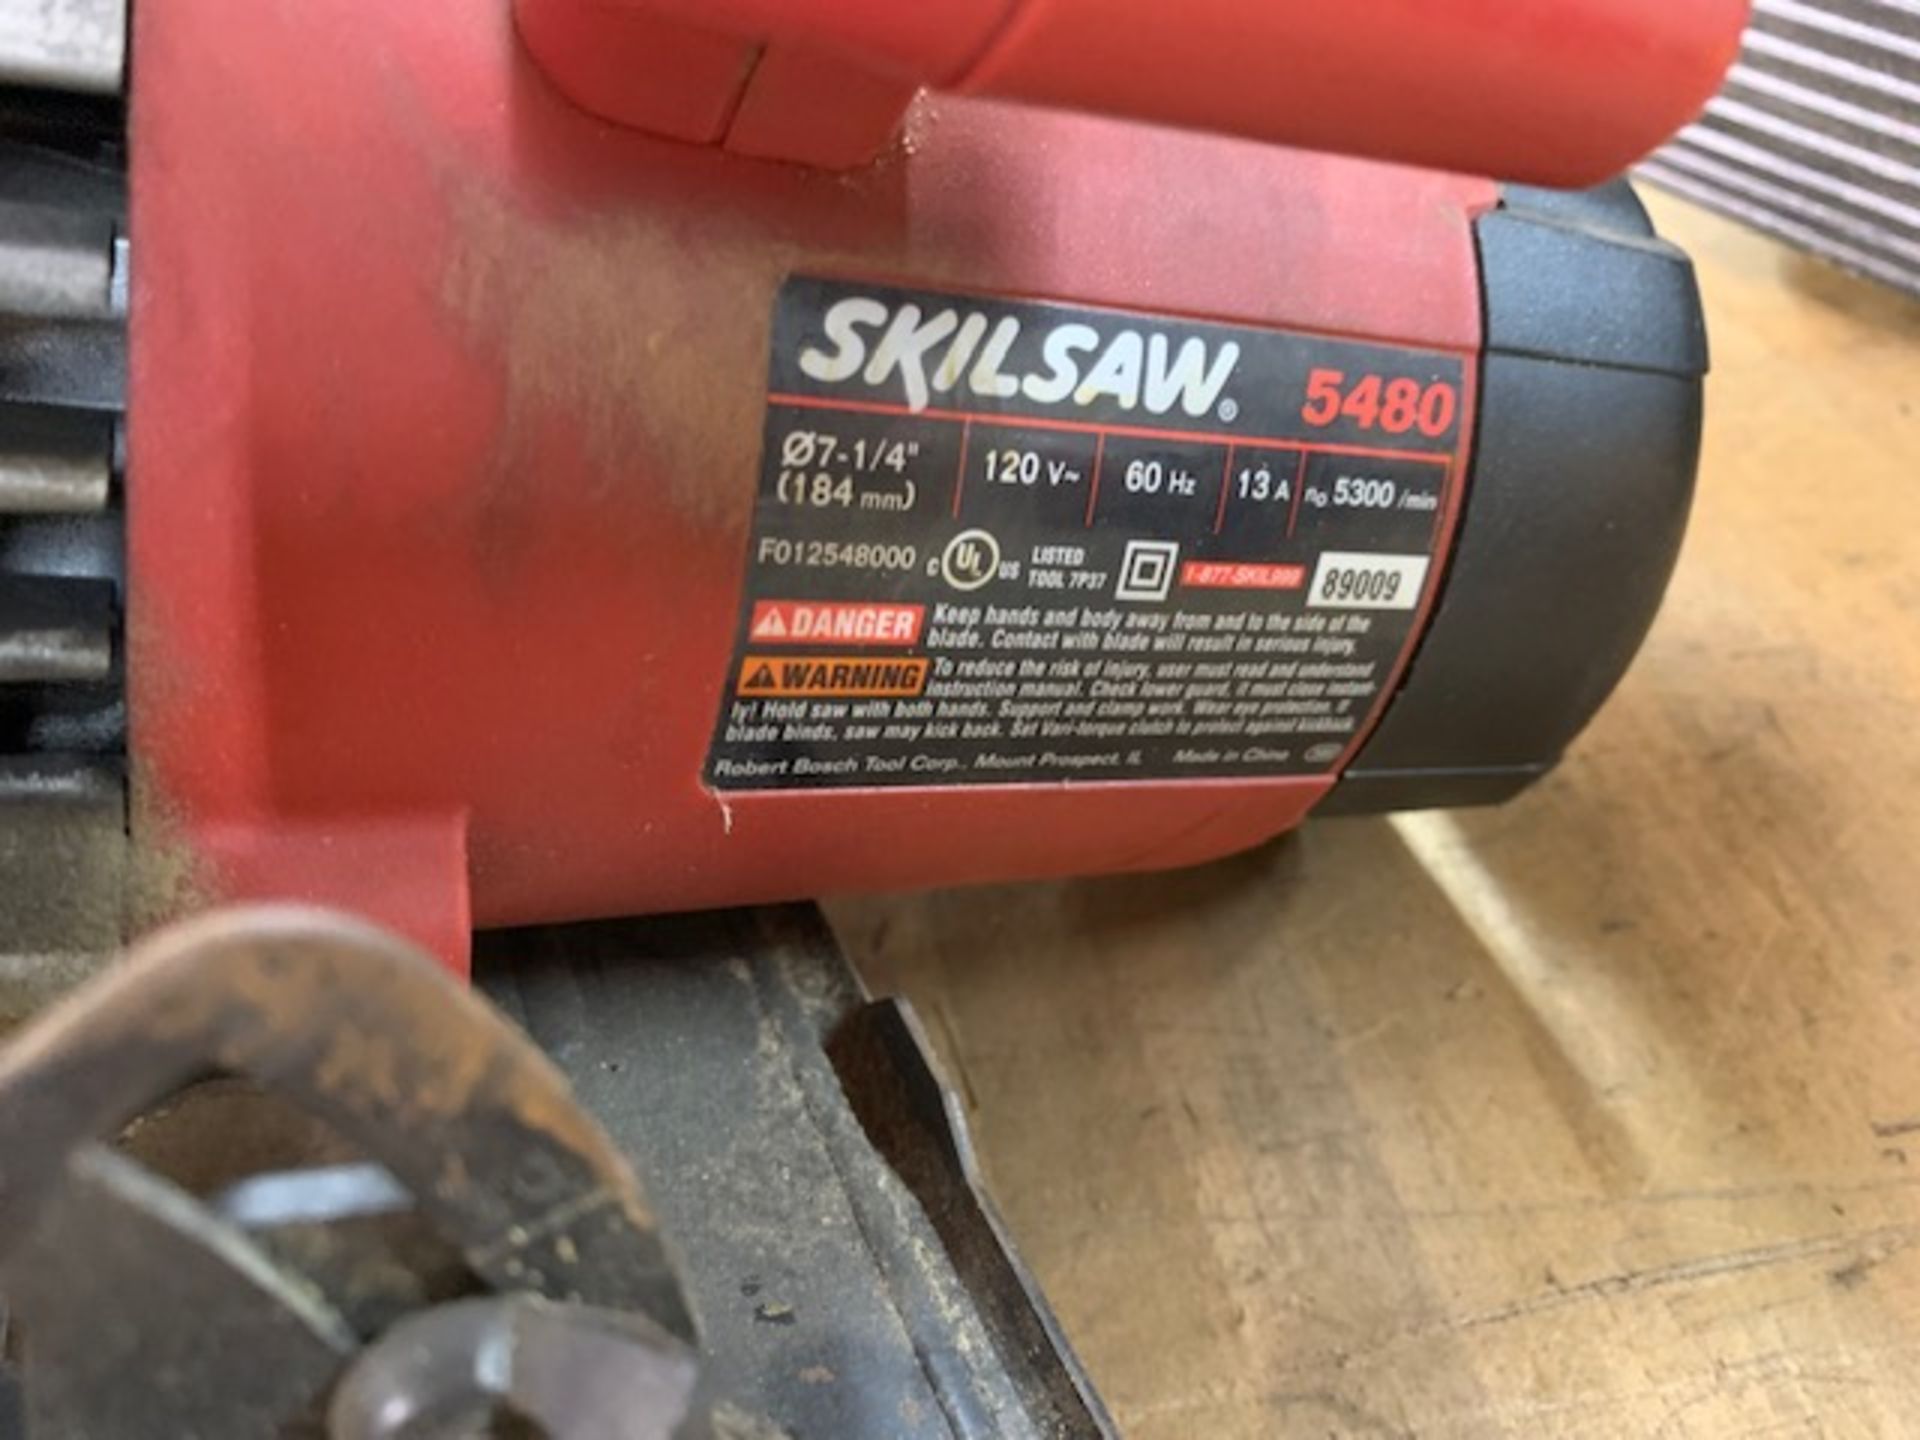 SKILSAW 5480 7-1/4 INCH CIRCULAR SAW WITH CARBIDE TIPPED BLADE - Image 2 of 3